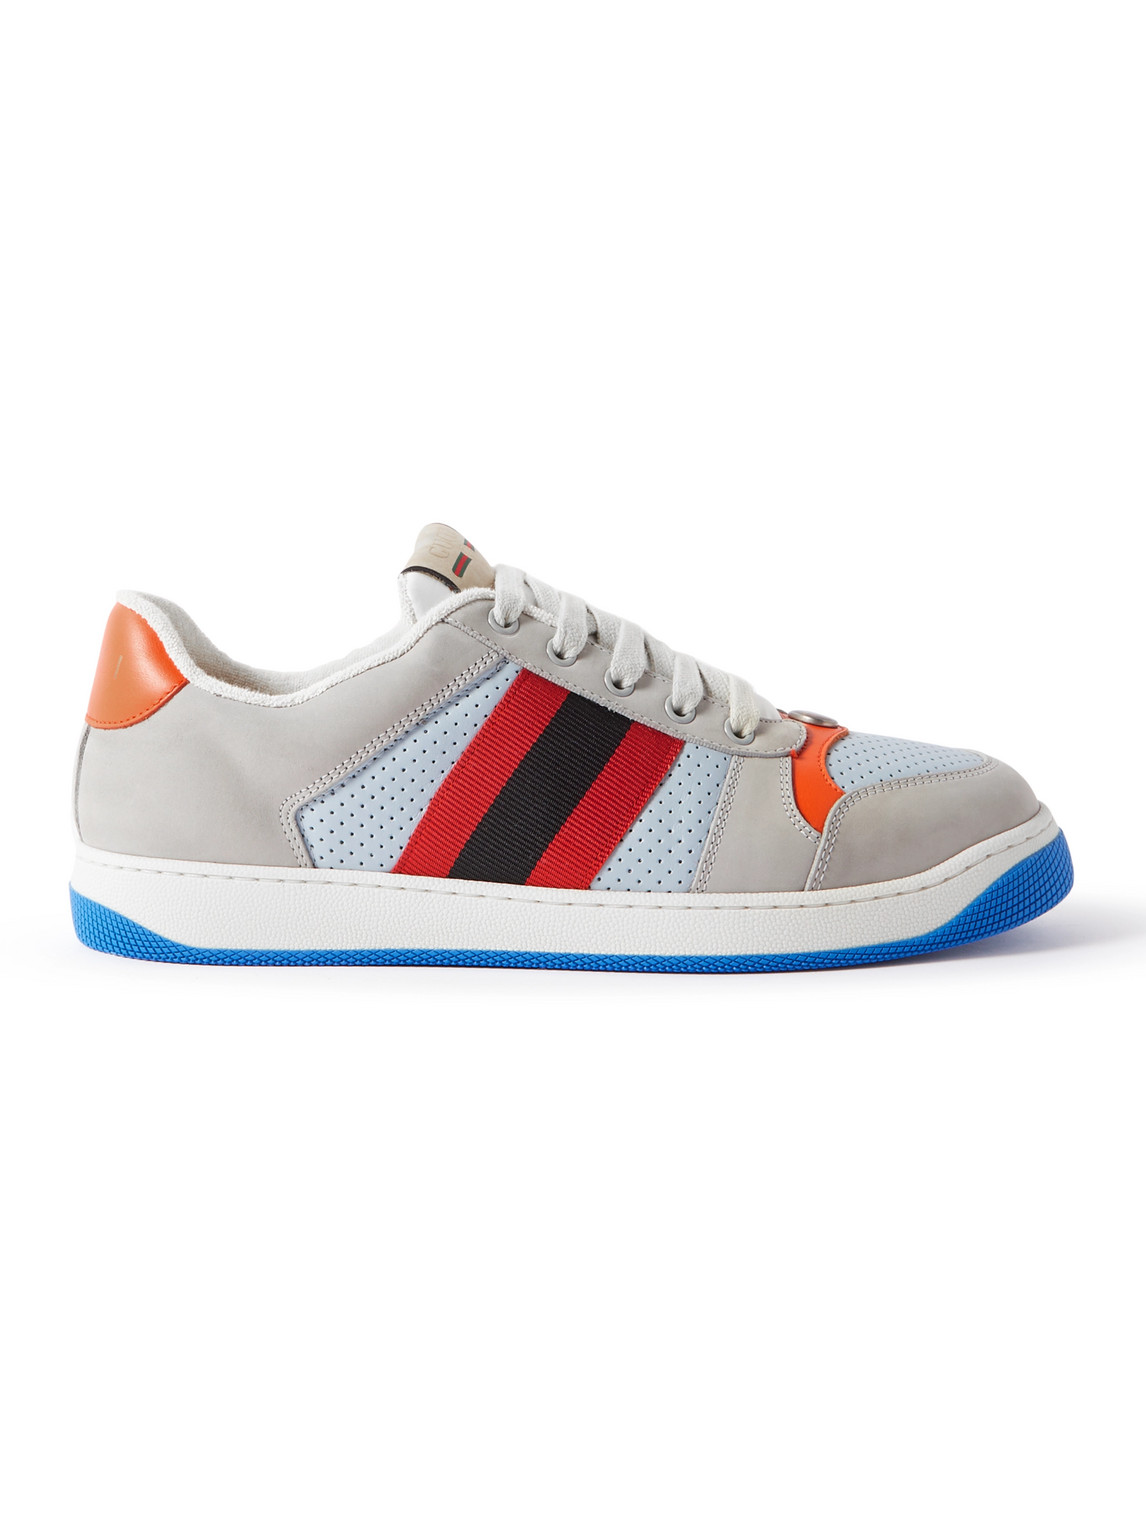 GUCCI SCREENER SUEDE, MESH, WEBBING AND LEATHER SNEAKERS